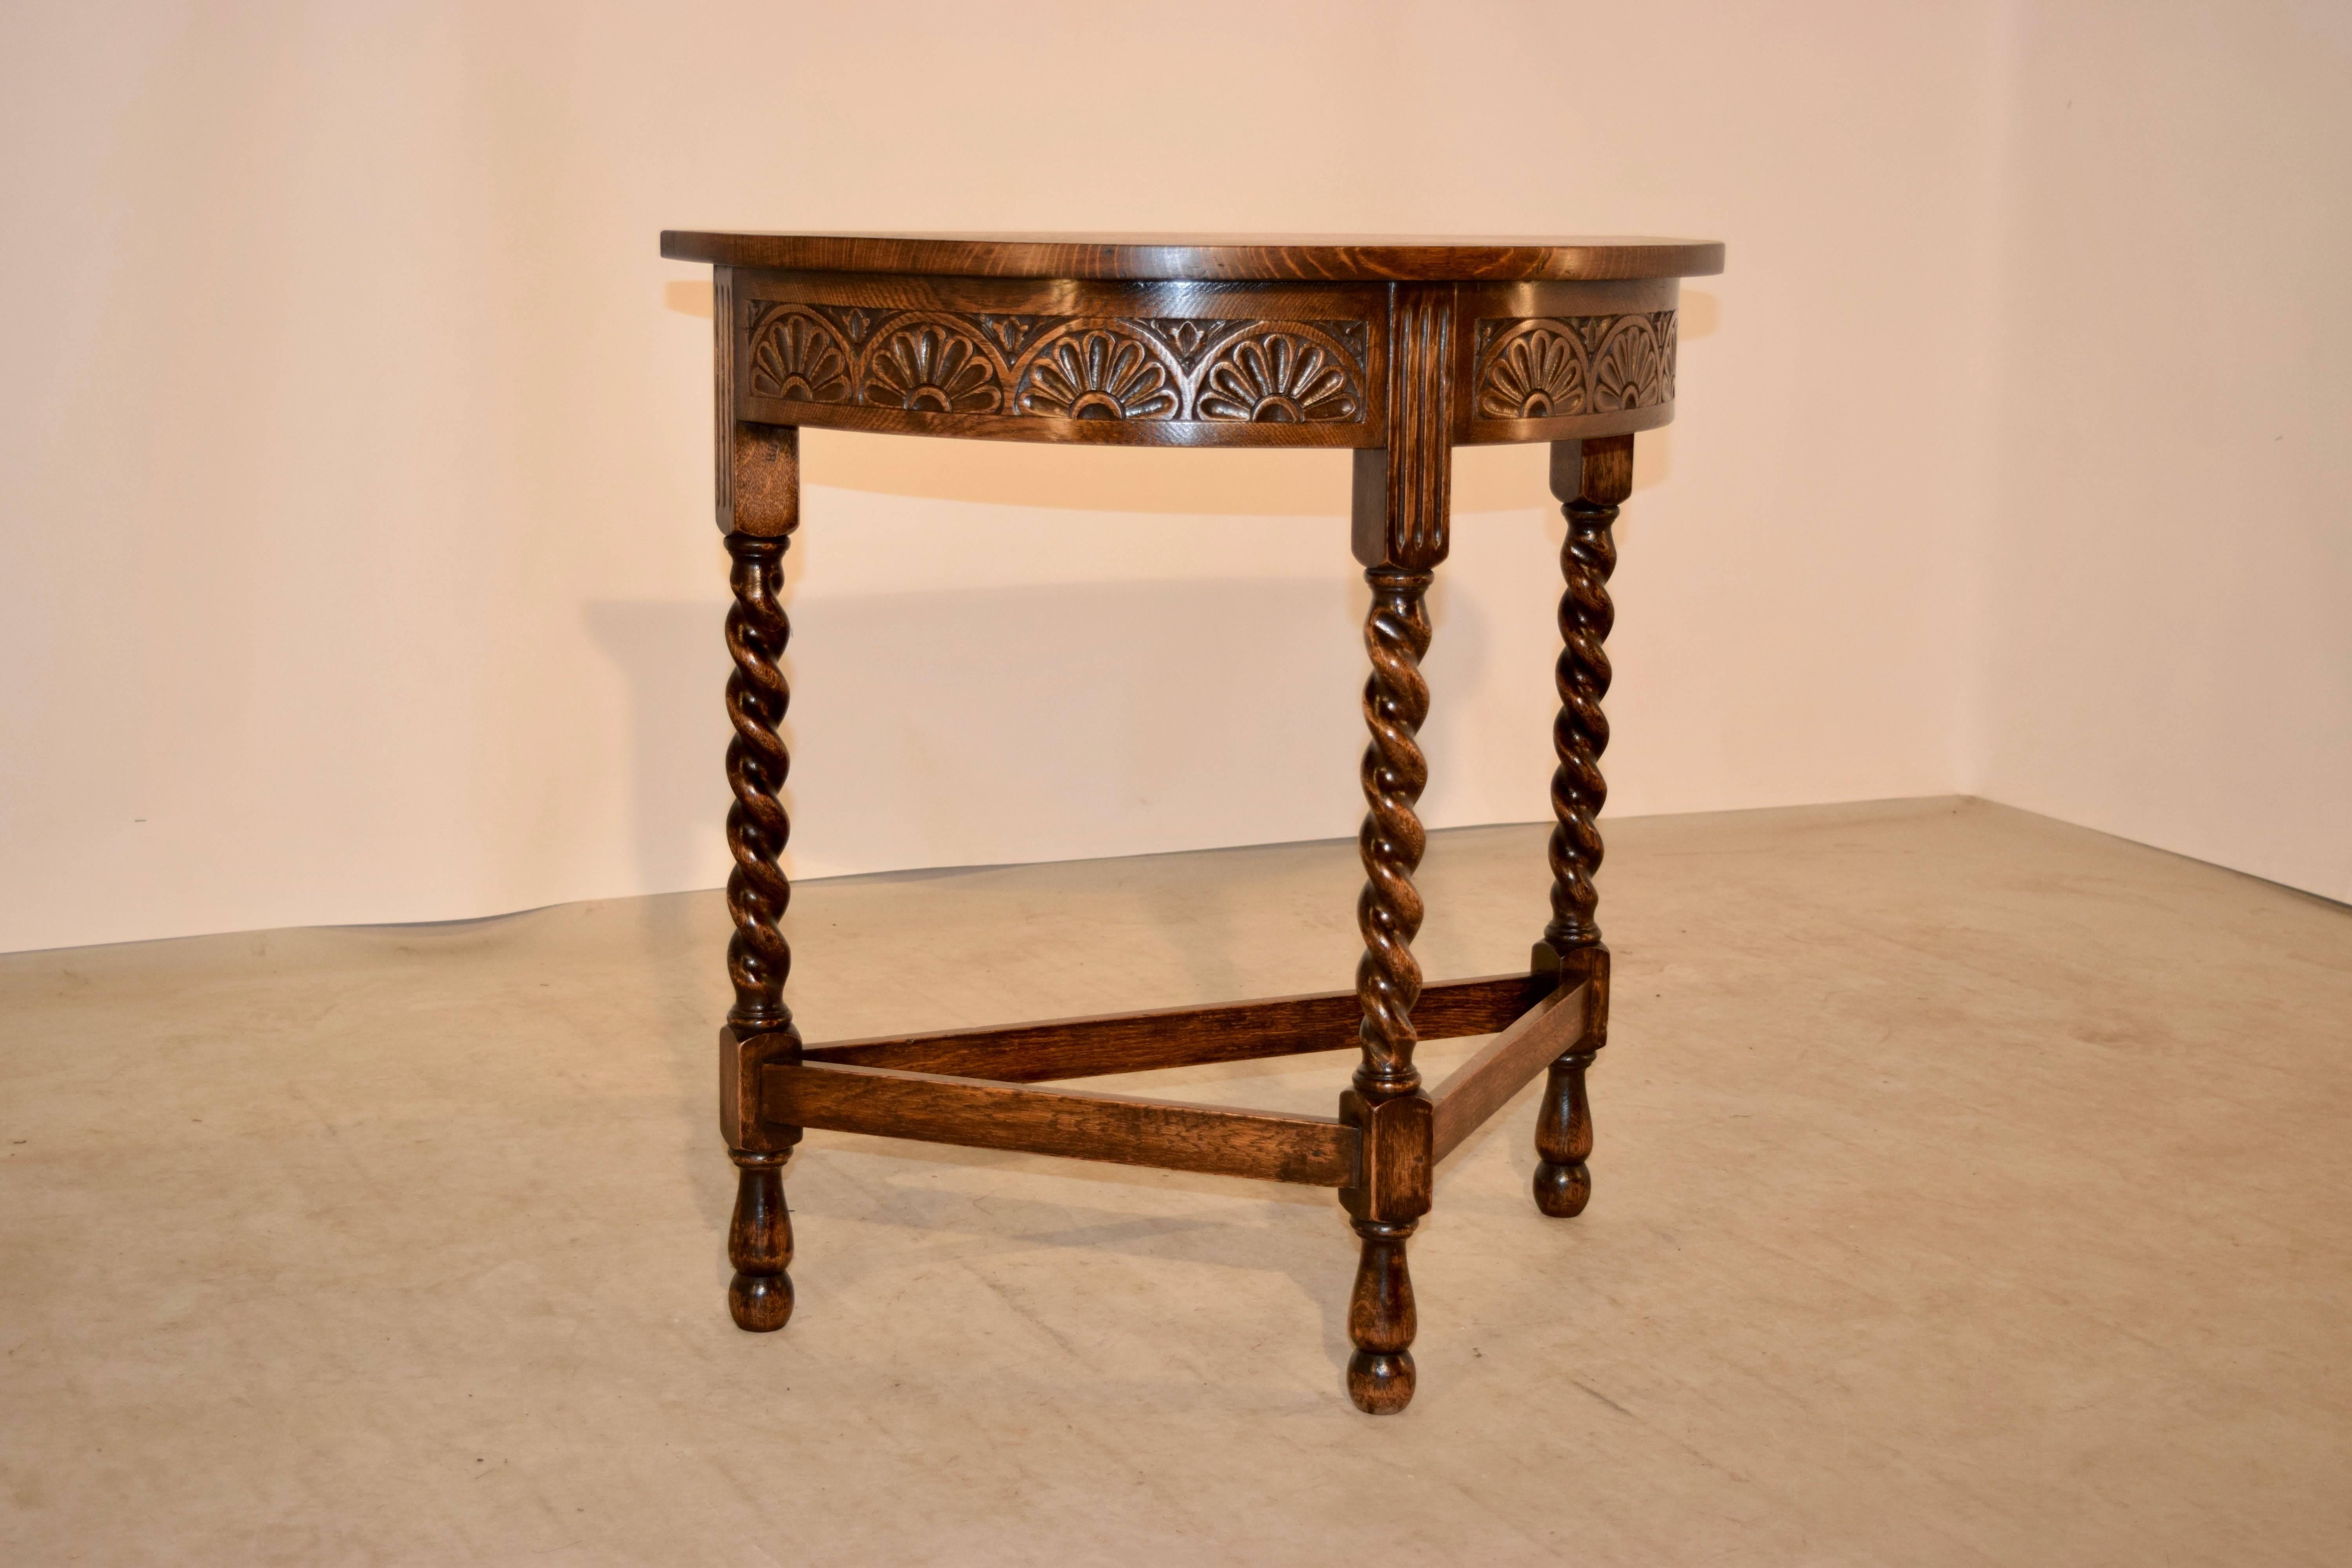 19th century English oak demilune with a hand-carved decorated apron and supported on hand-turned barley twist legs, joined by simple stretchers and supported on hand-turned feet.